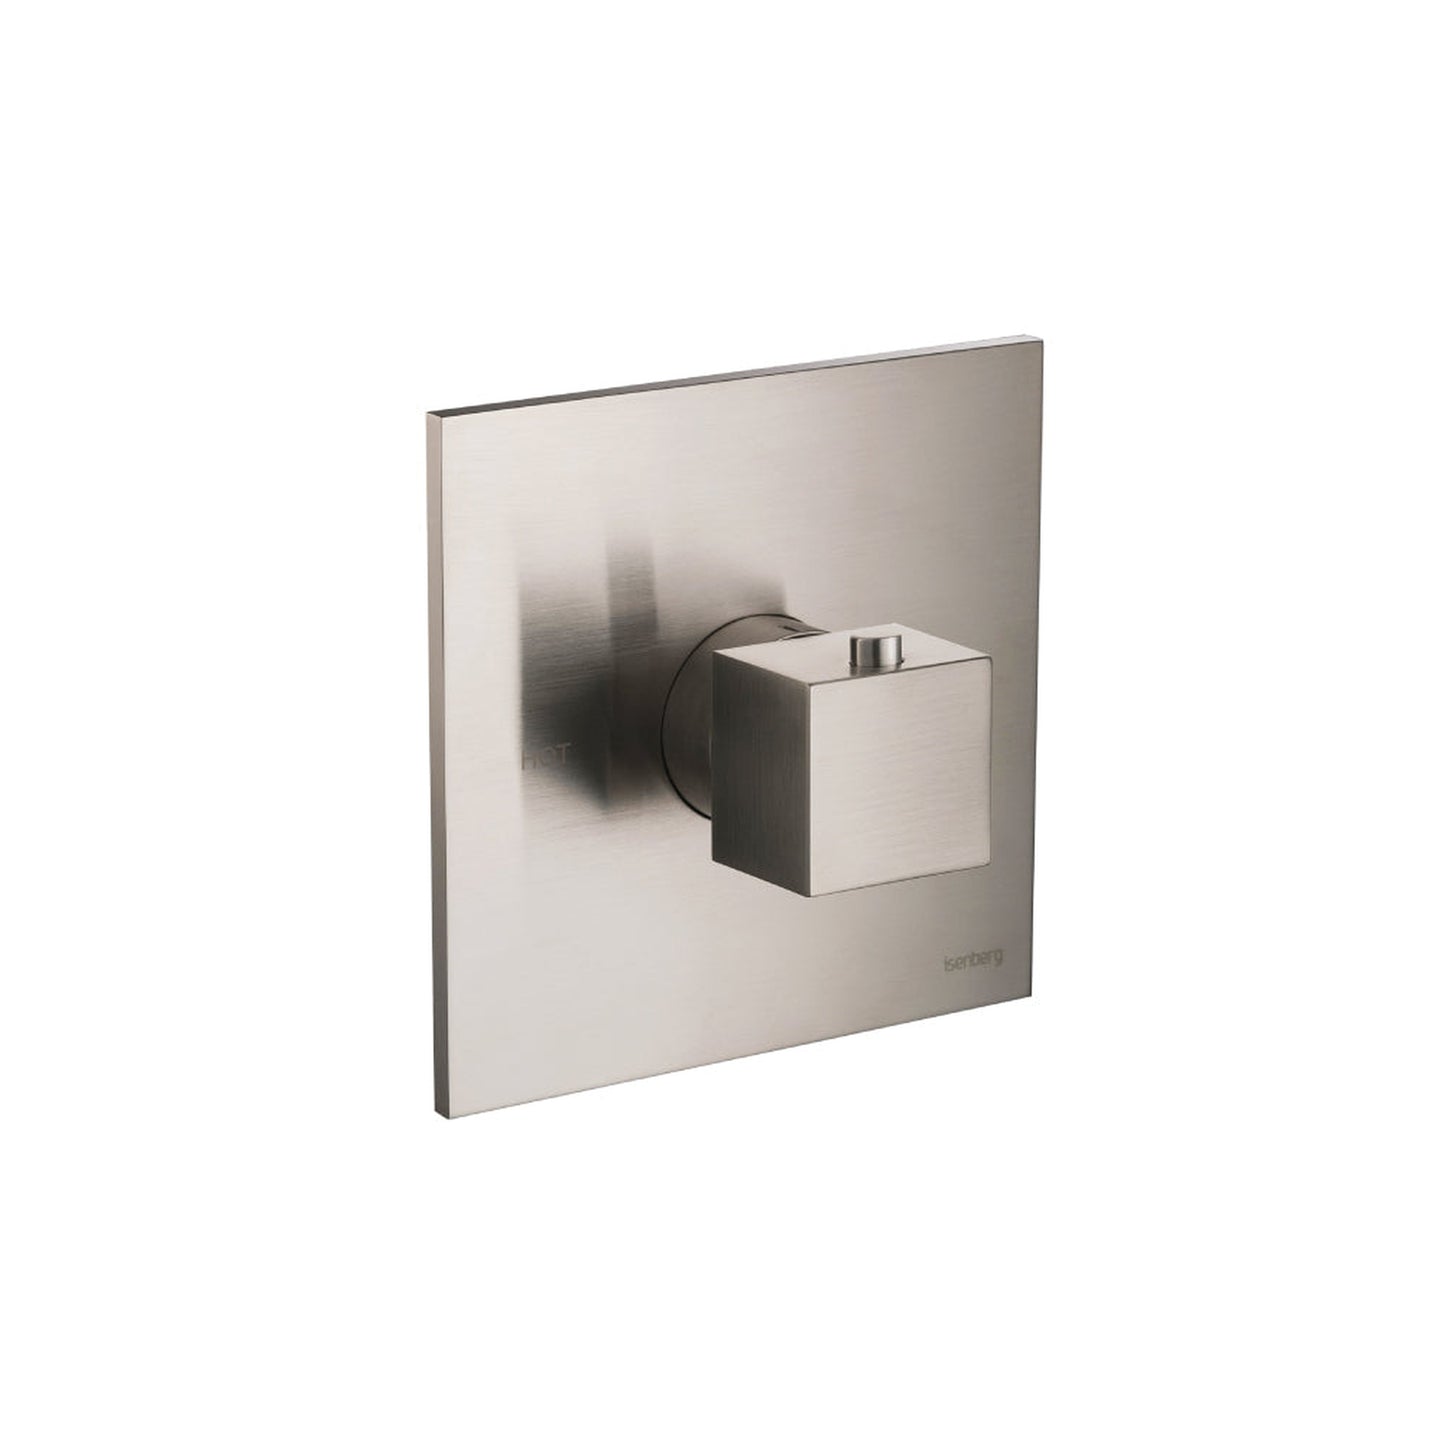 Isenberg Serie 160 Single Output Trim for 3/4" Thermostatic Valve in Brushed Nickel